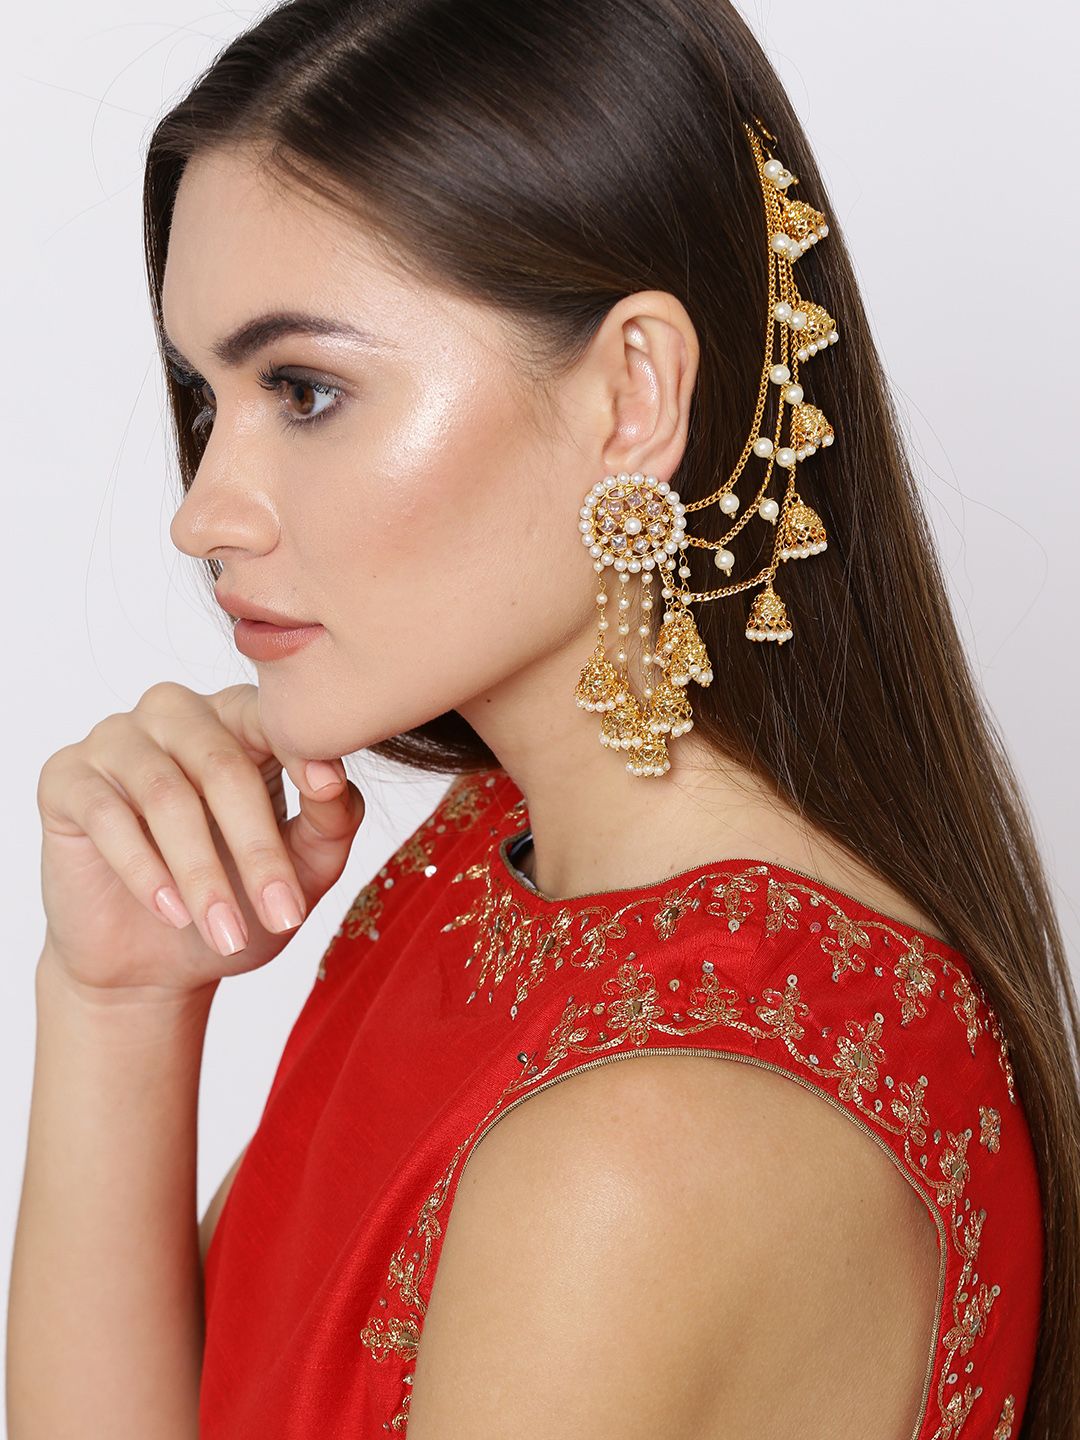 YouBella Off-White Gold-Plated Beaded Jhumkas with Ear Chains Price in India